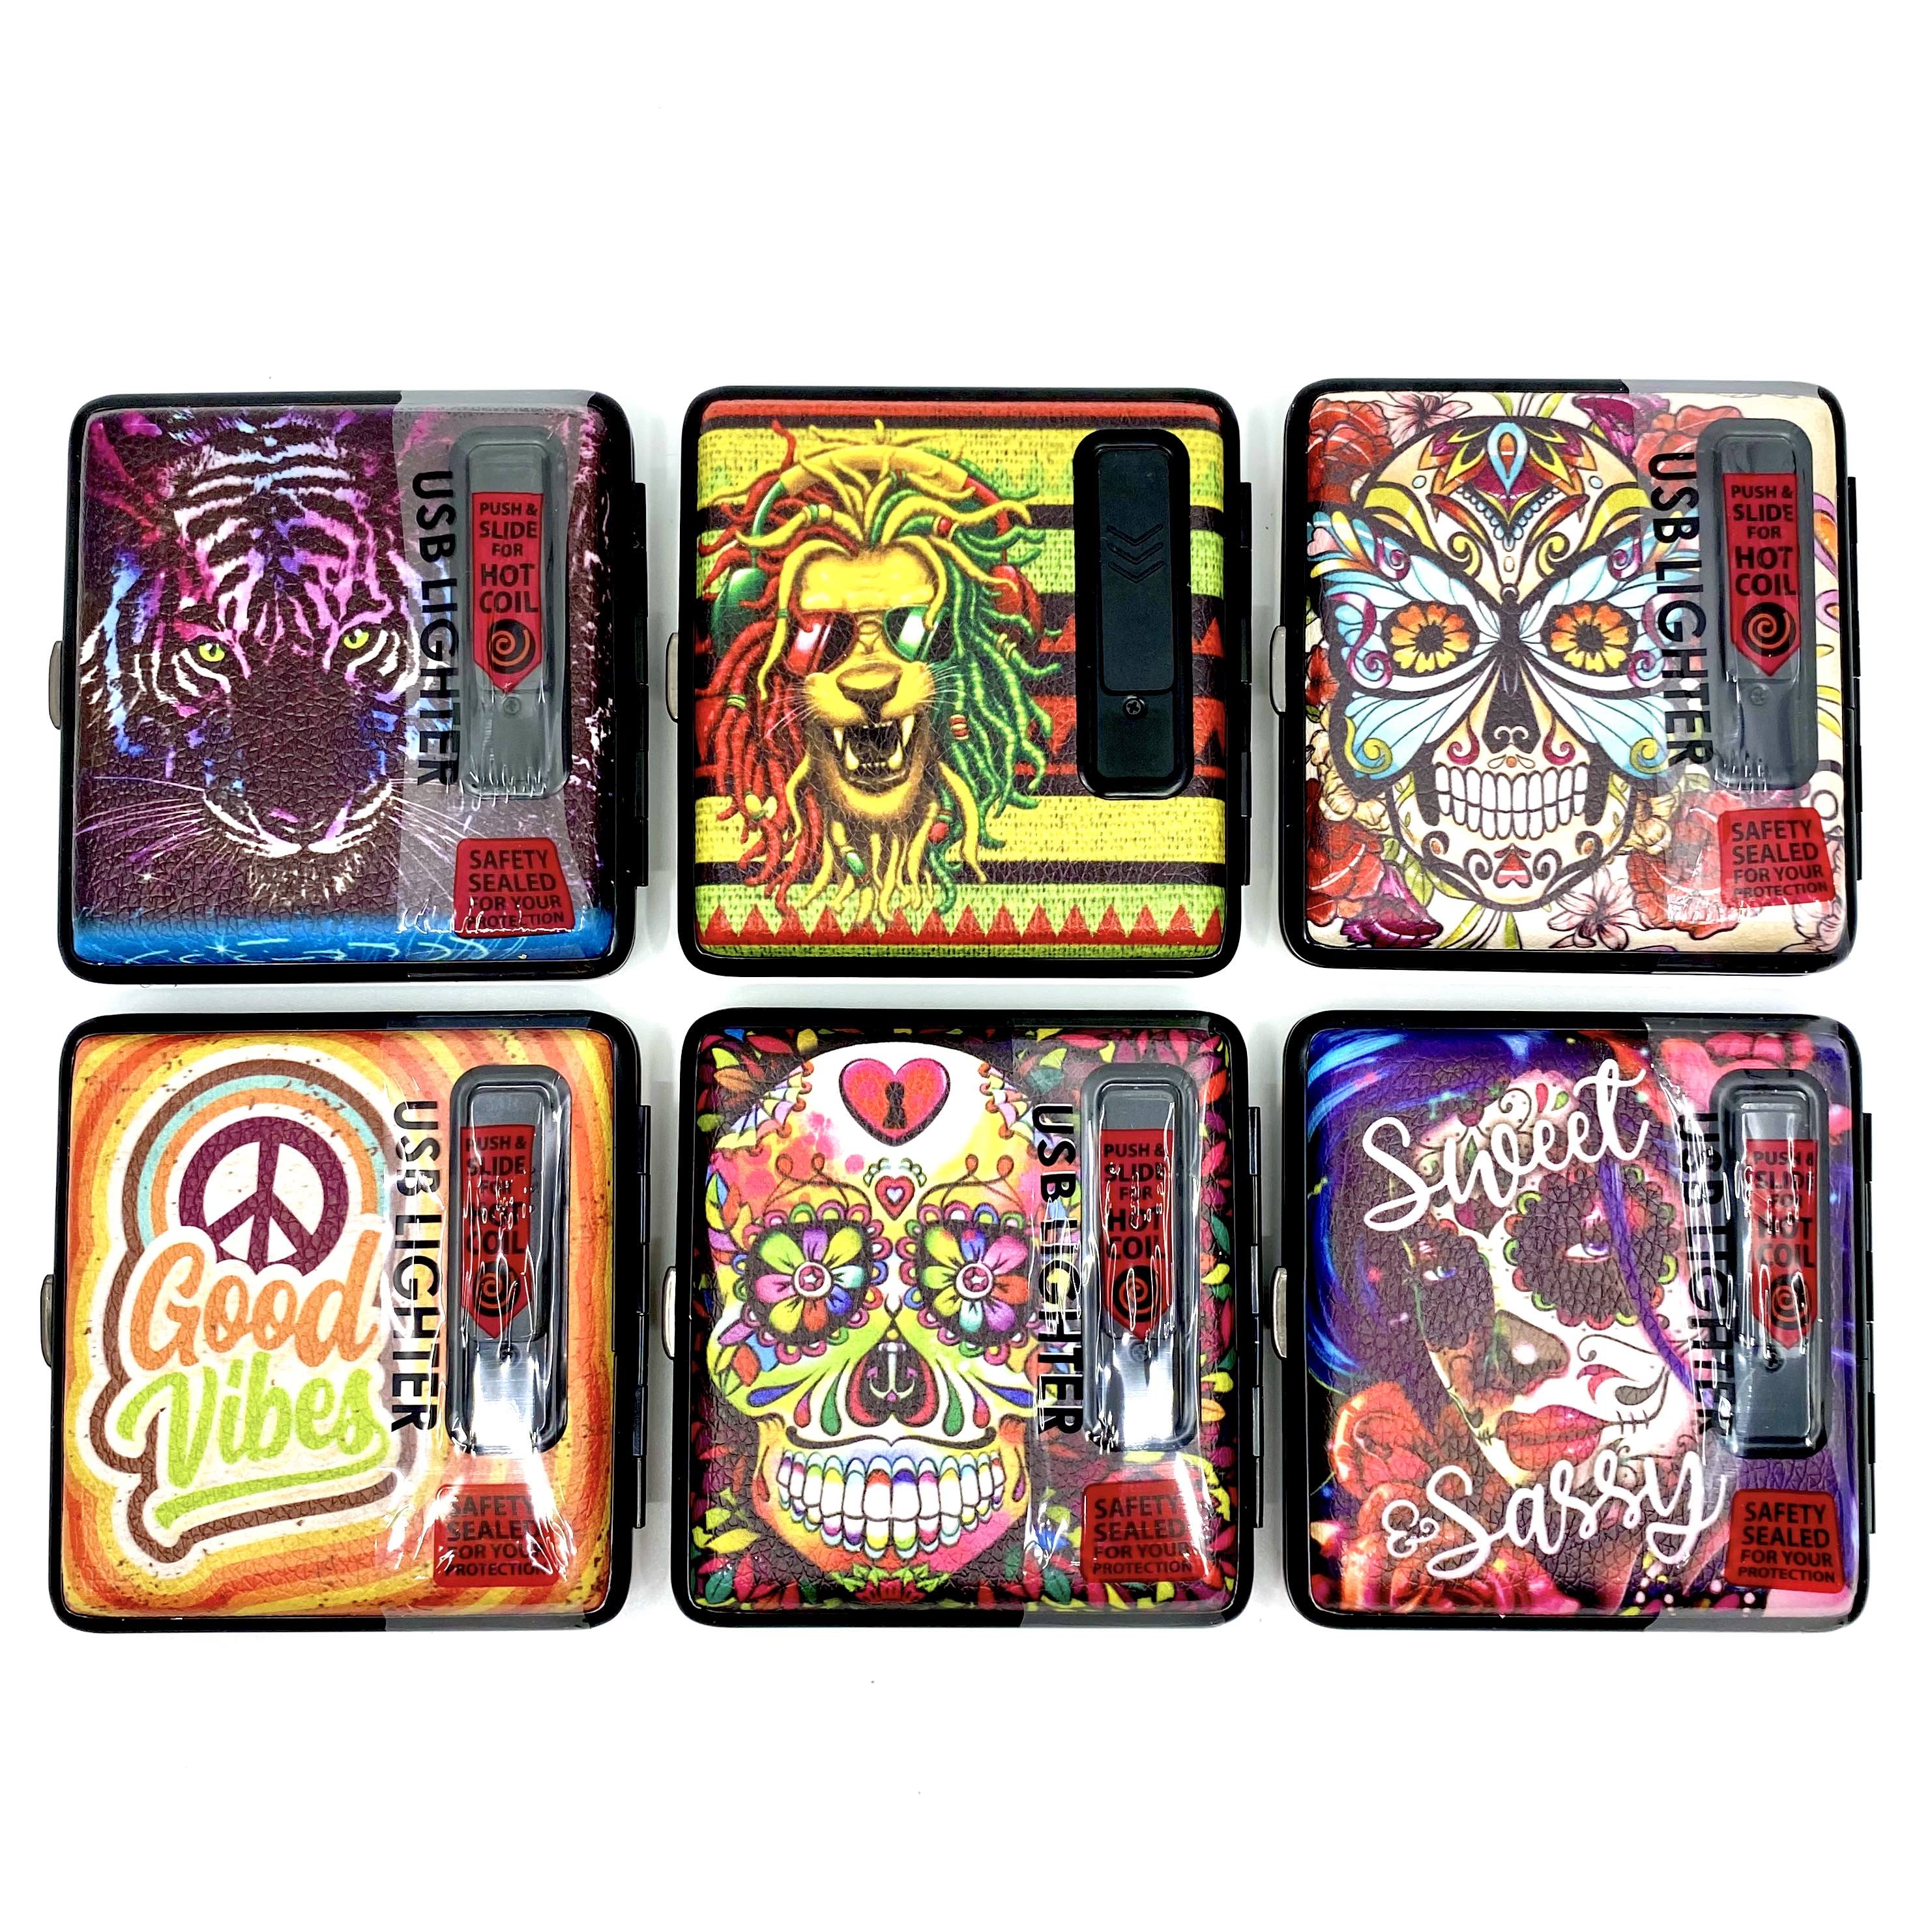 LIGHTER CASES  SMOKING TOOLS – NOVELTY INC WHOLESALE